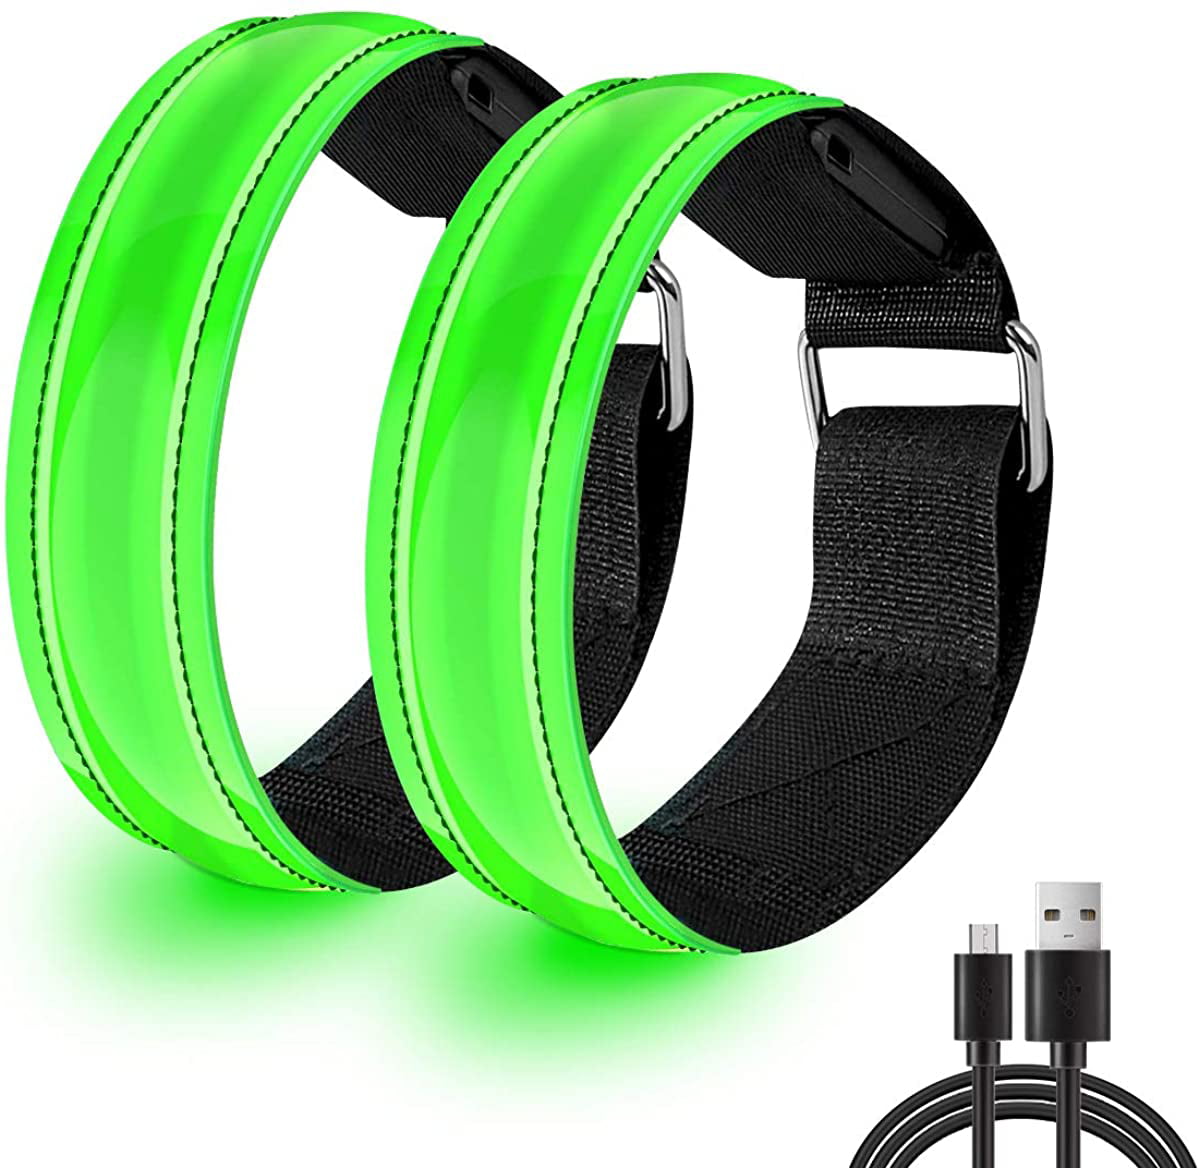 Details about   Rechargeable LED Armband Ankle USB Flash Light for Night Running Walking Cycling 